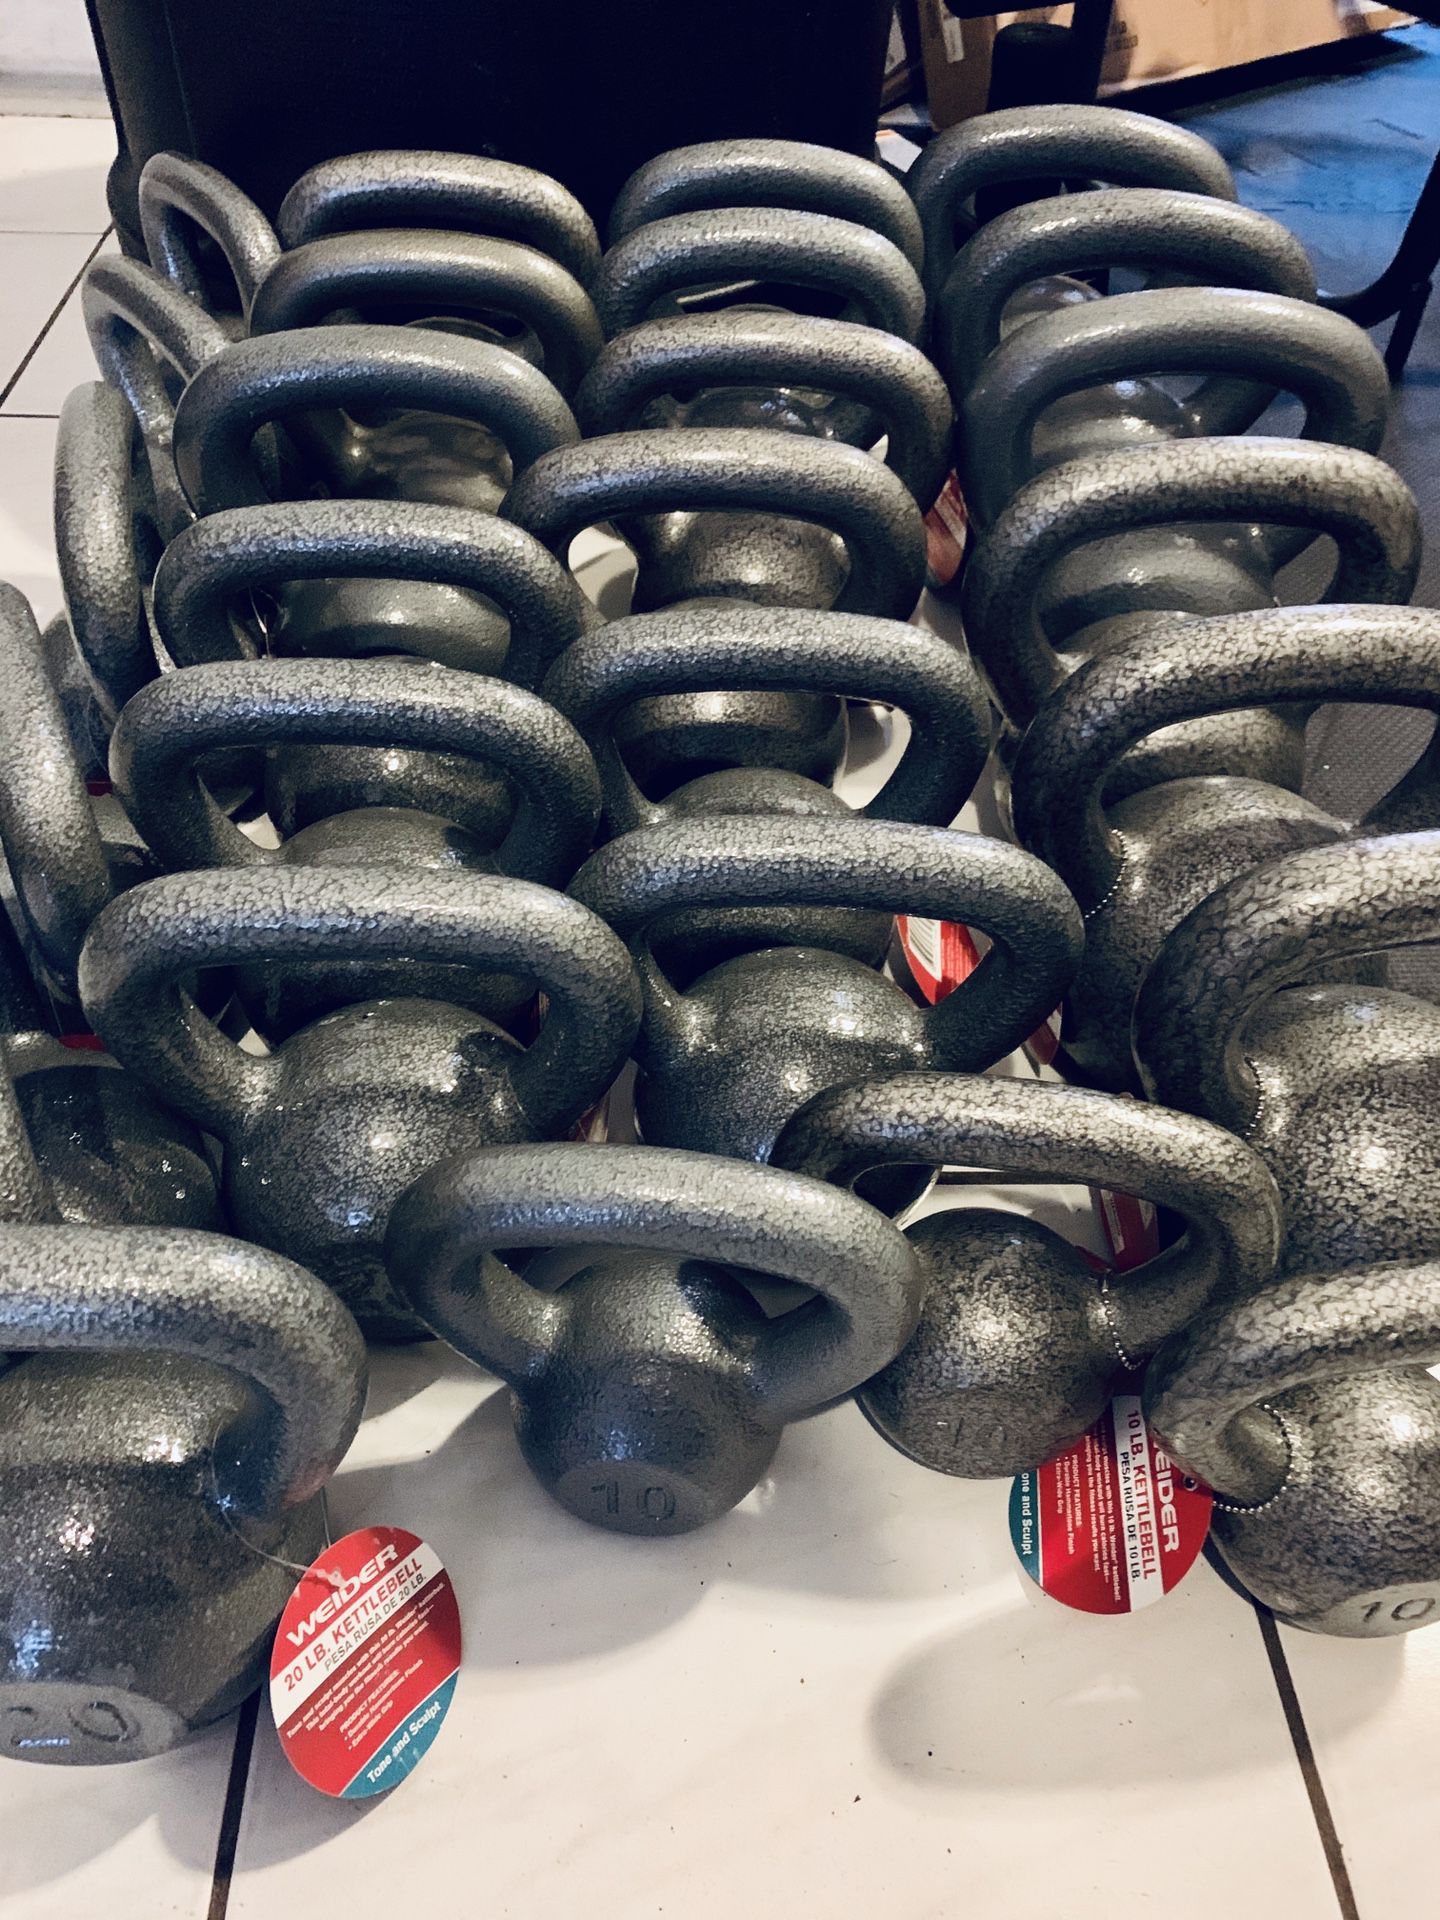 Kettlebells starting at $25 for 10 lbs